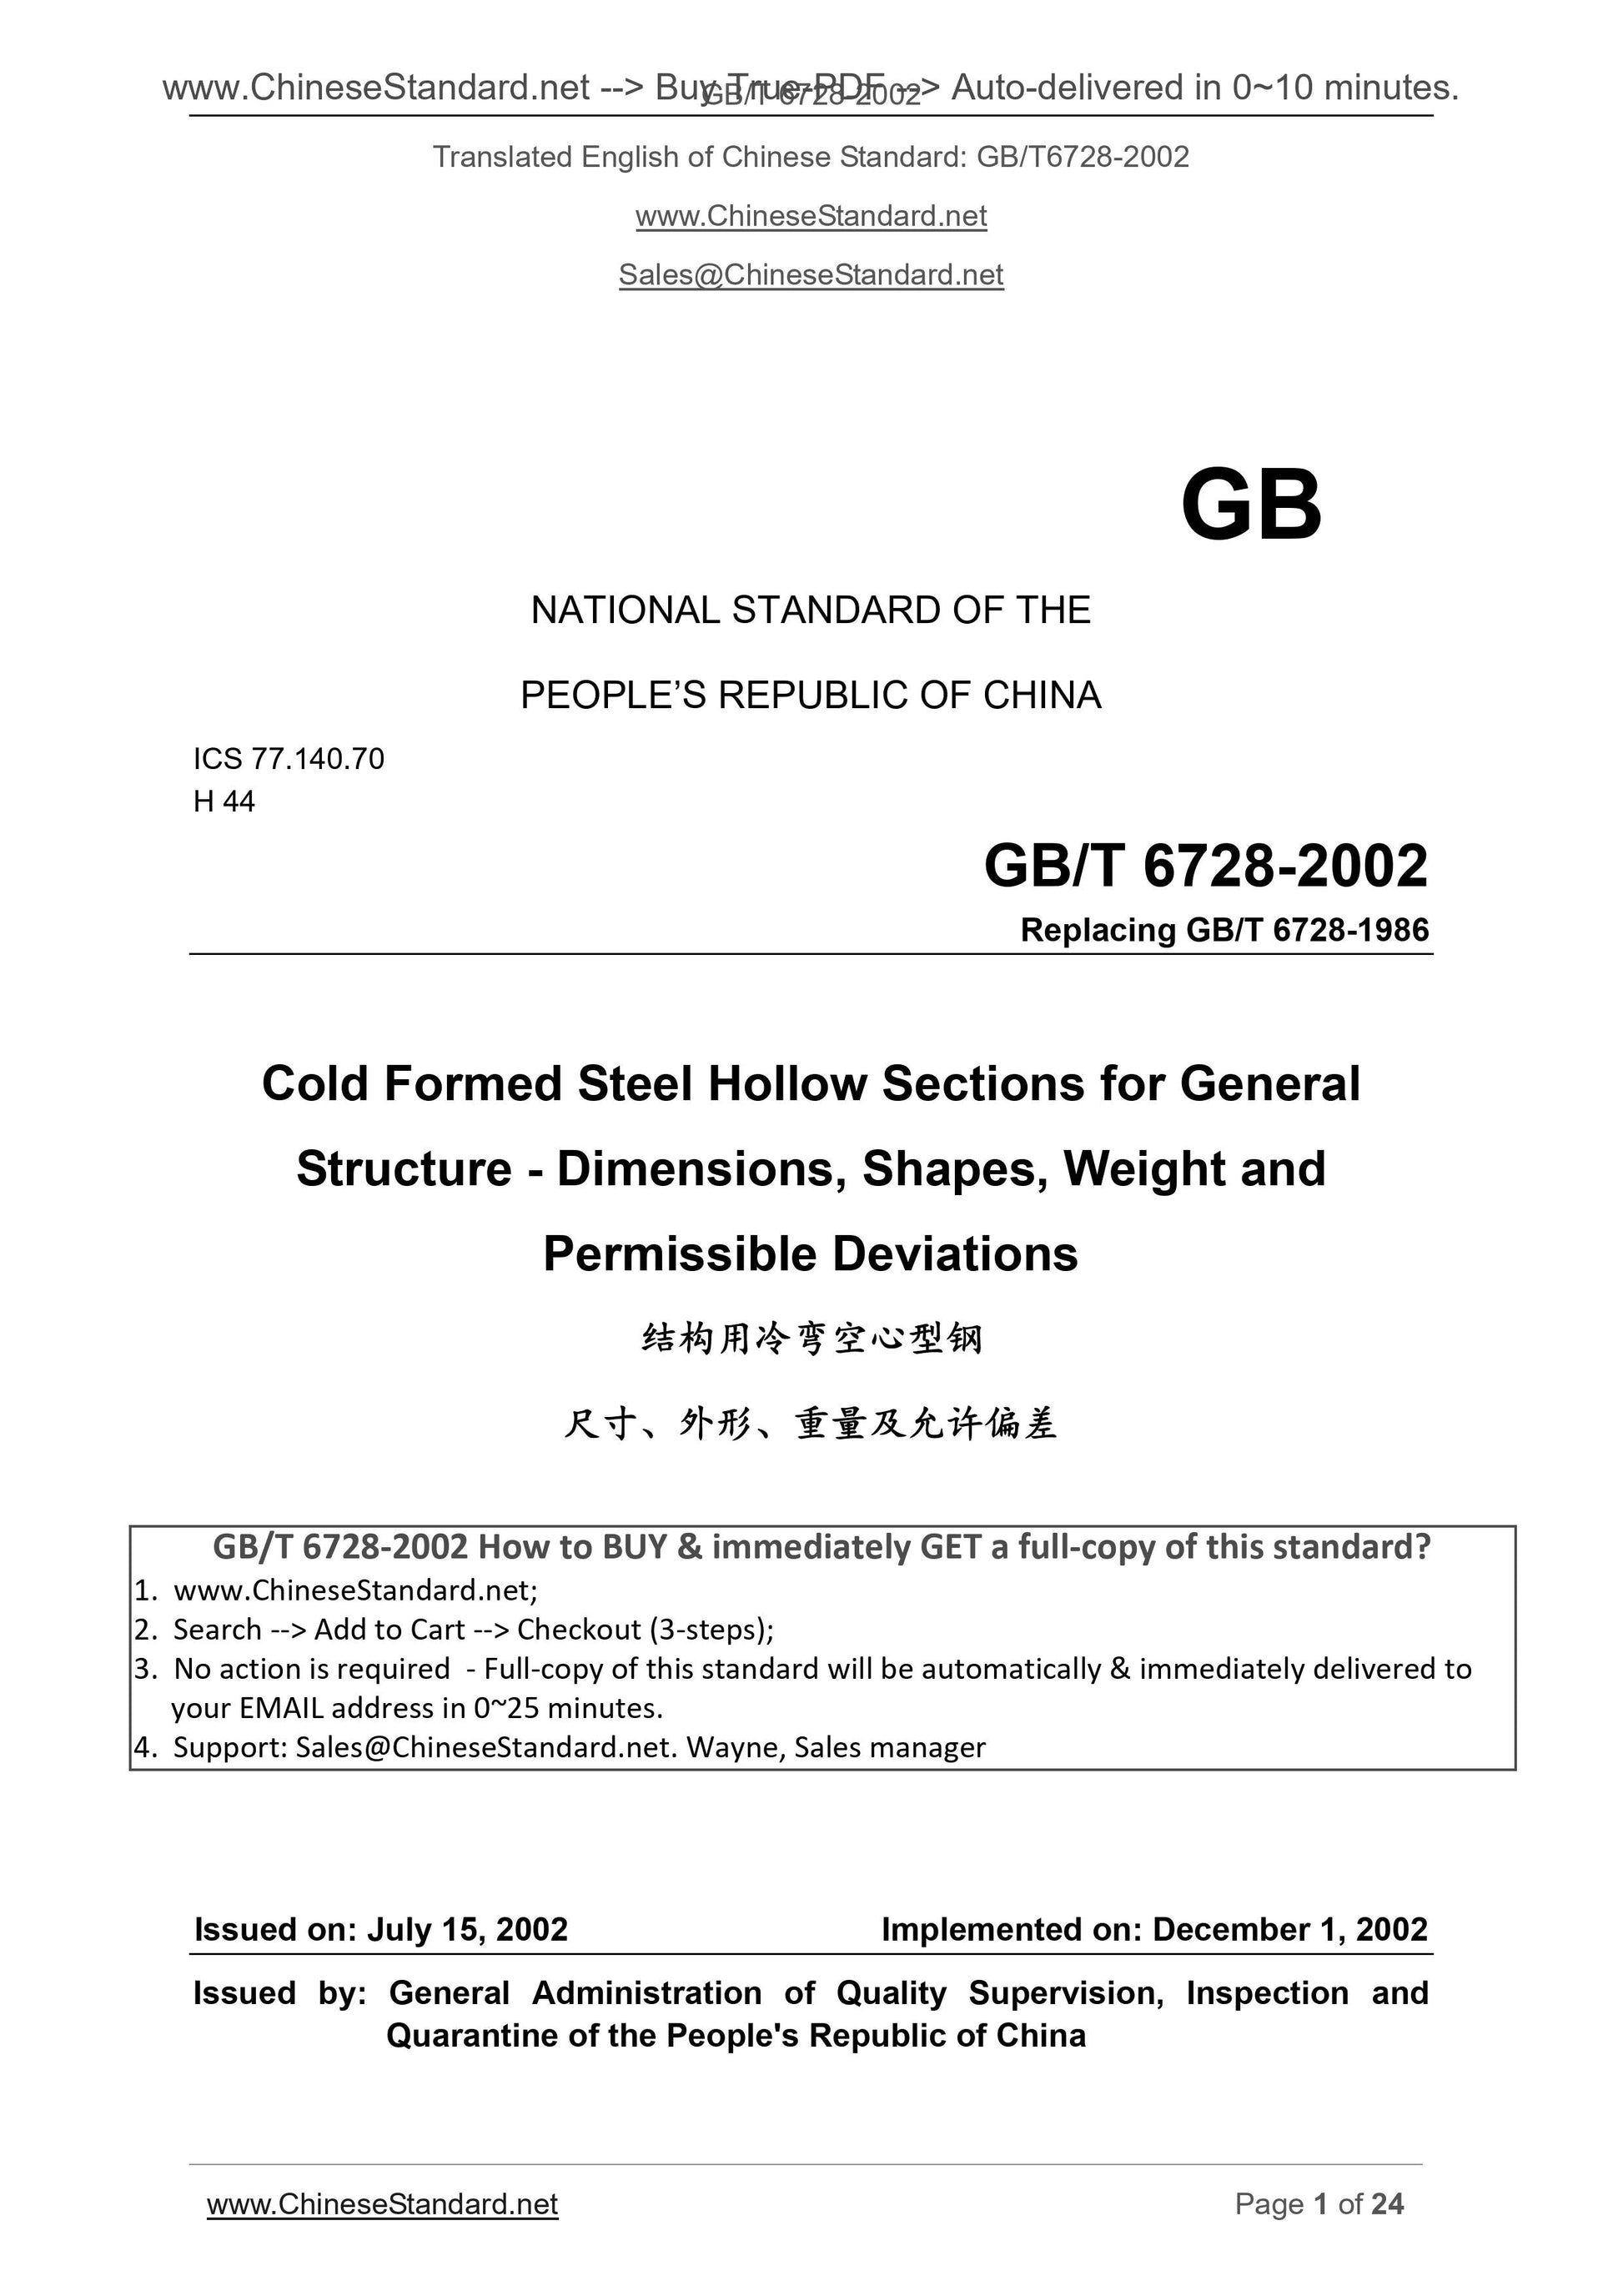 GB/T 6728-2002 Page 1